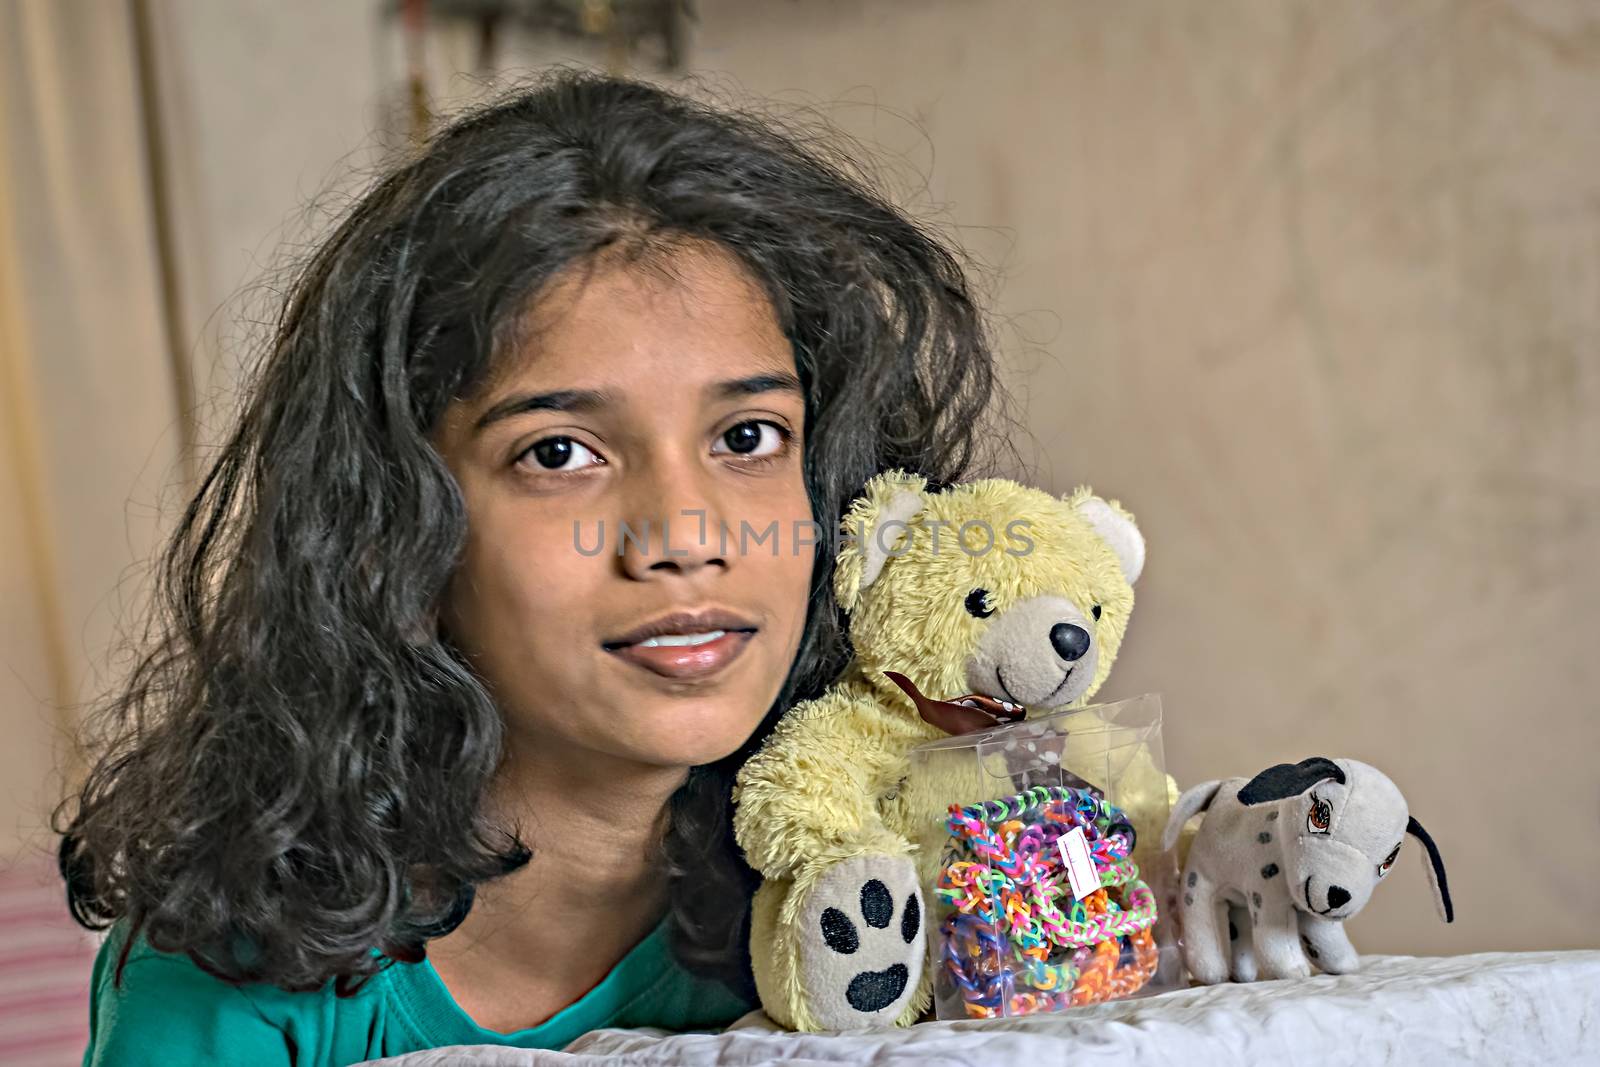 Young girl with her favorite soft toys - teddy bear and puppy. by lalam